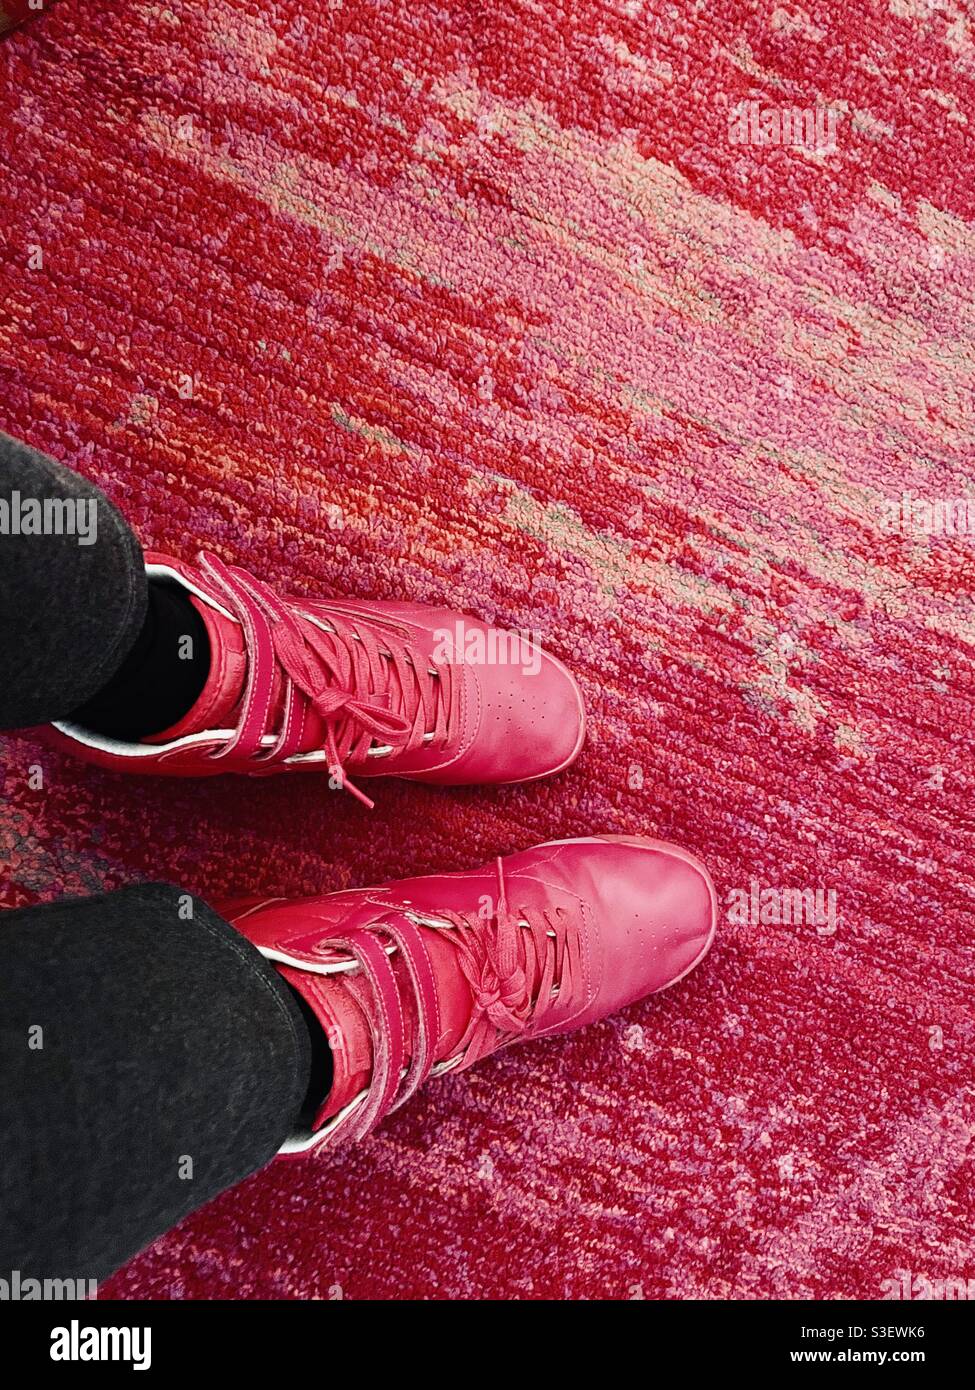 Woman standing on a pink carpet wearing a pair of hot pink Reebok high top athletic shoes, USA Stock Photo